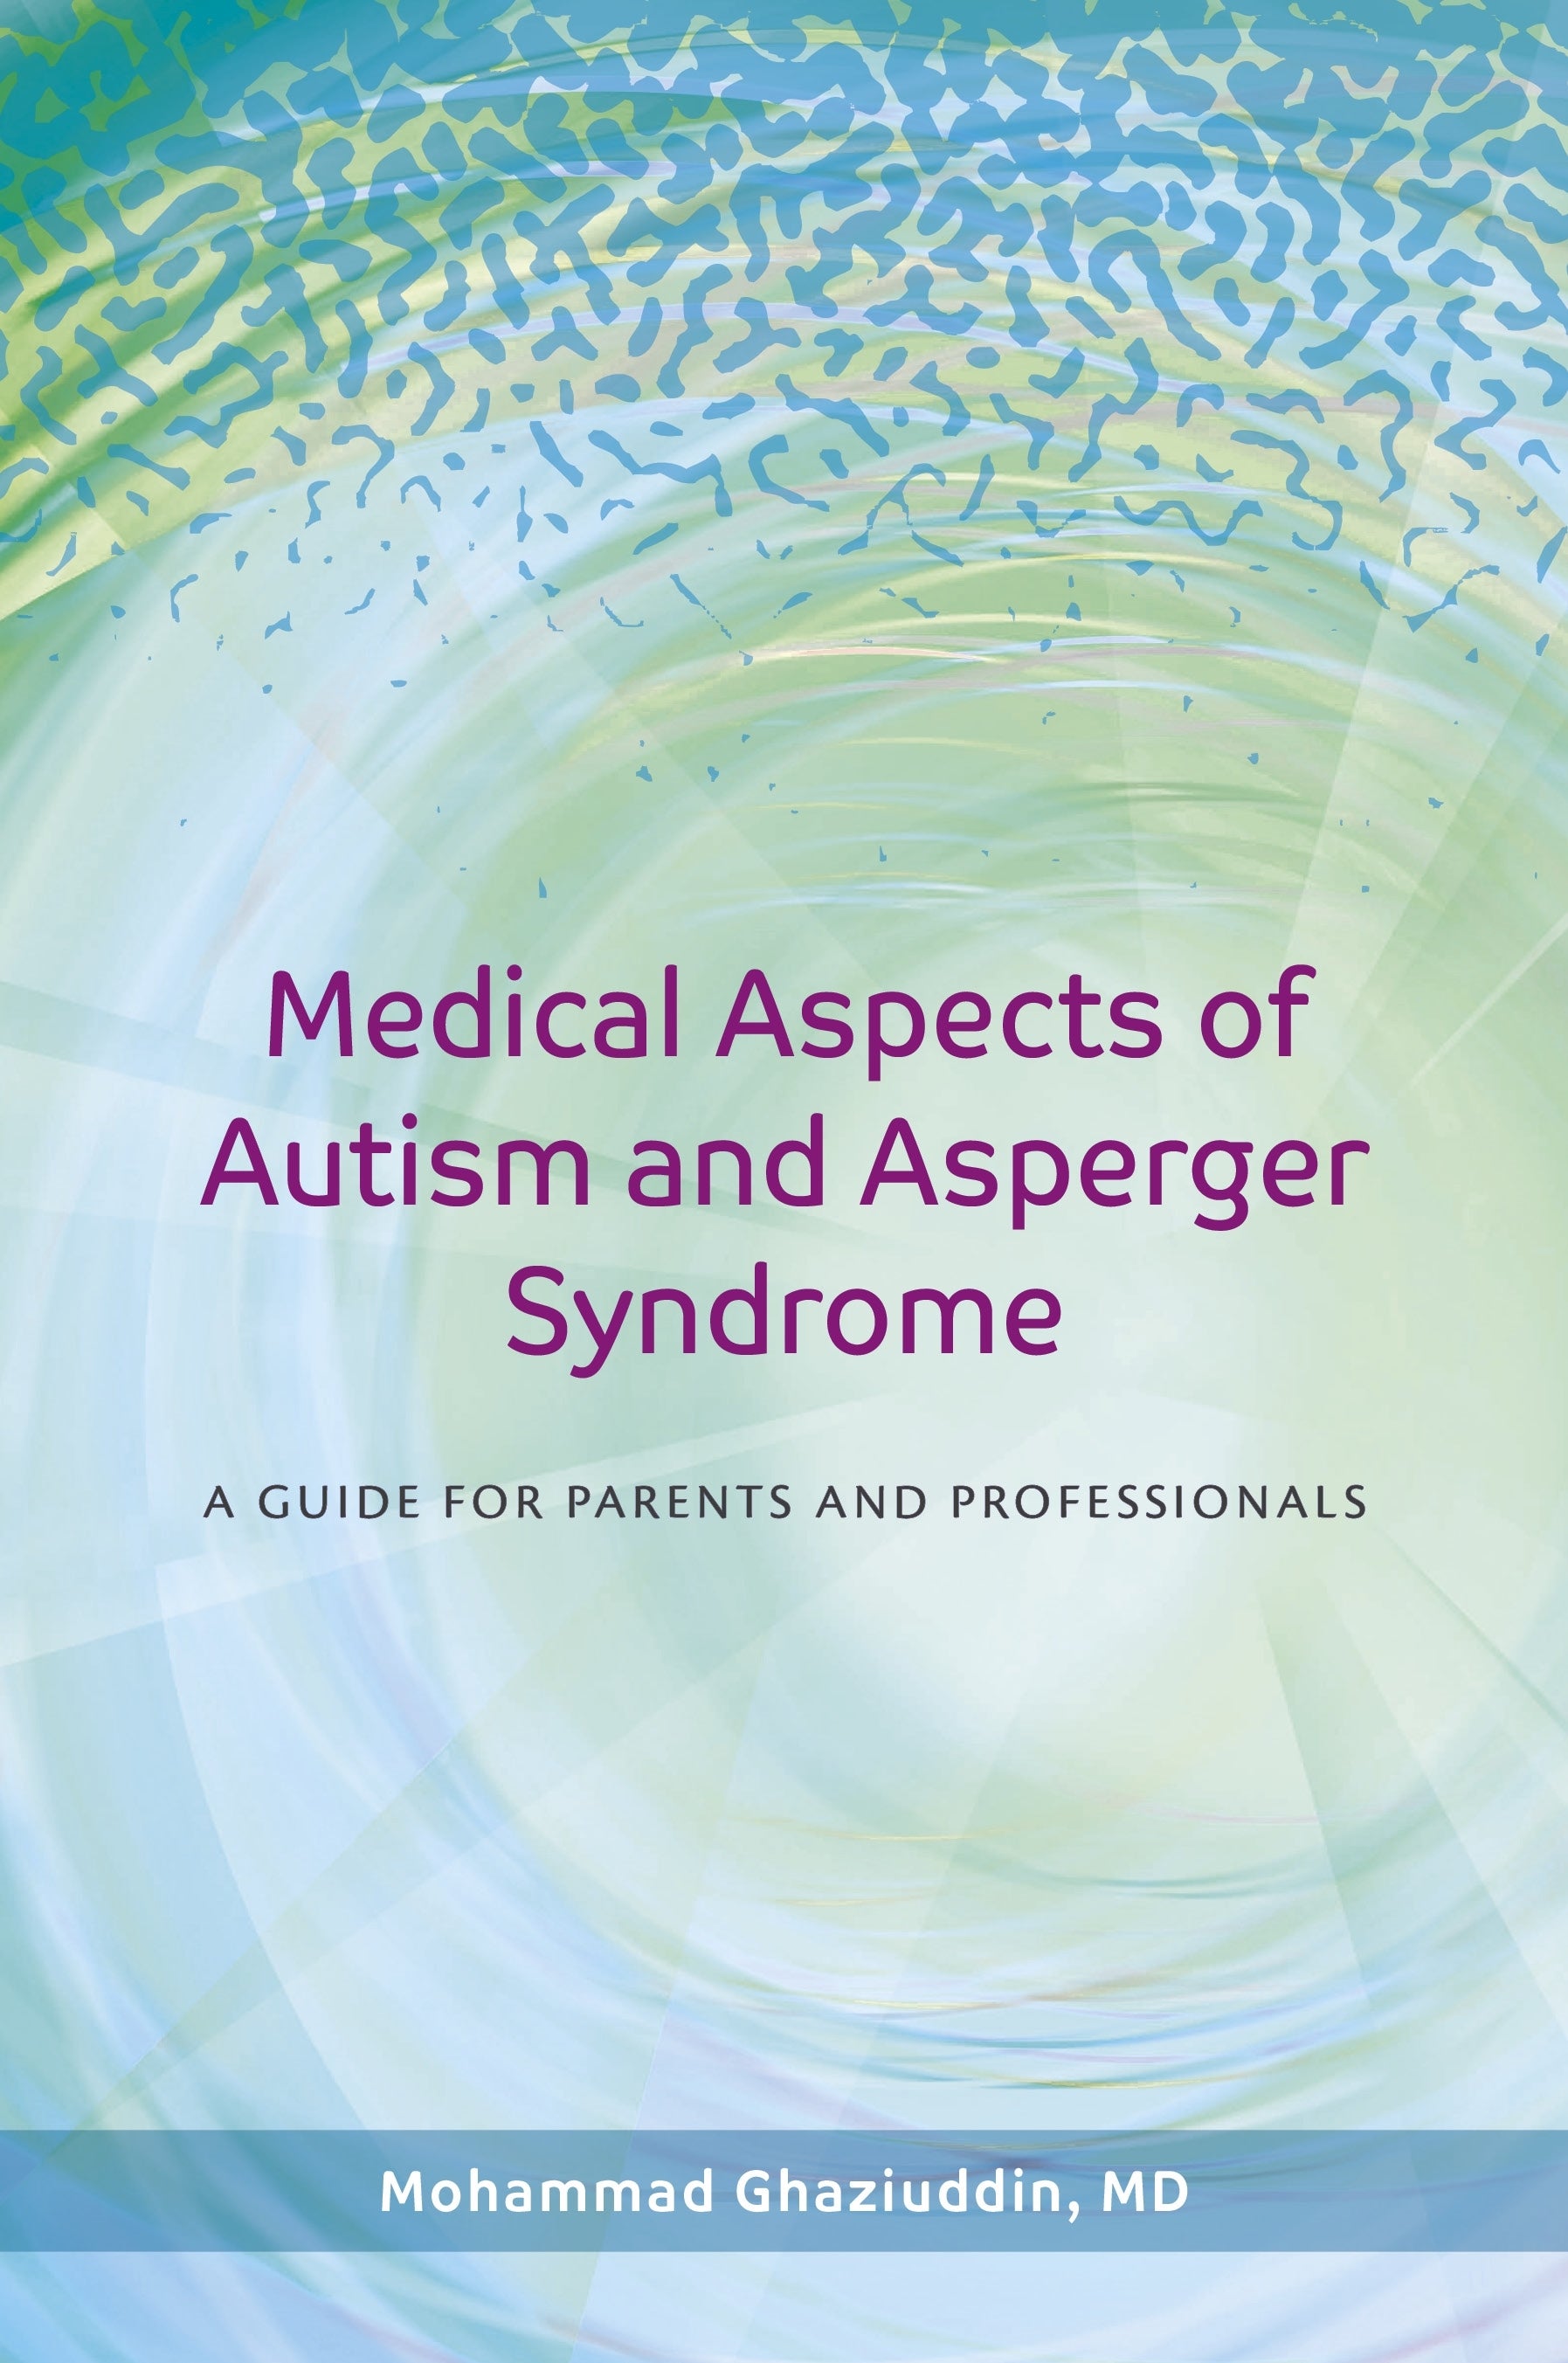 Medical Aspects of Autism and Asperger Syndrome by Mohammad Ghaziuddin